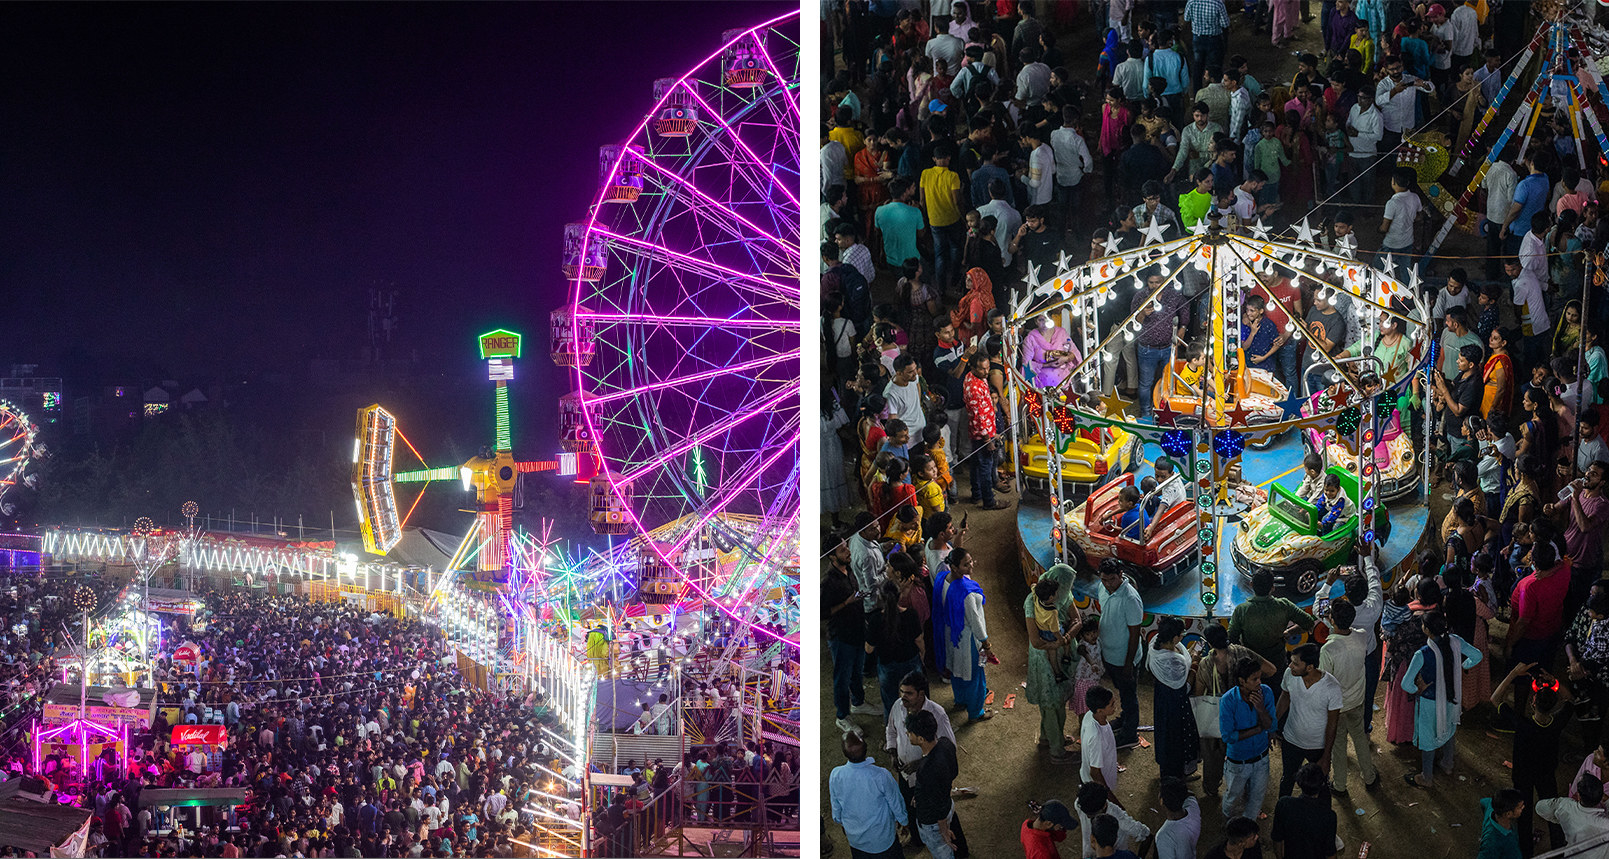 Two images of the carnival grounds in Nodia, New Delhi. The fairgrounds are full of rides with bright neon lights and it is packed with people. On the right is a photo of children riding a car themed ride.